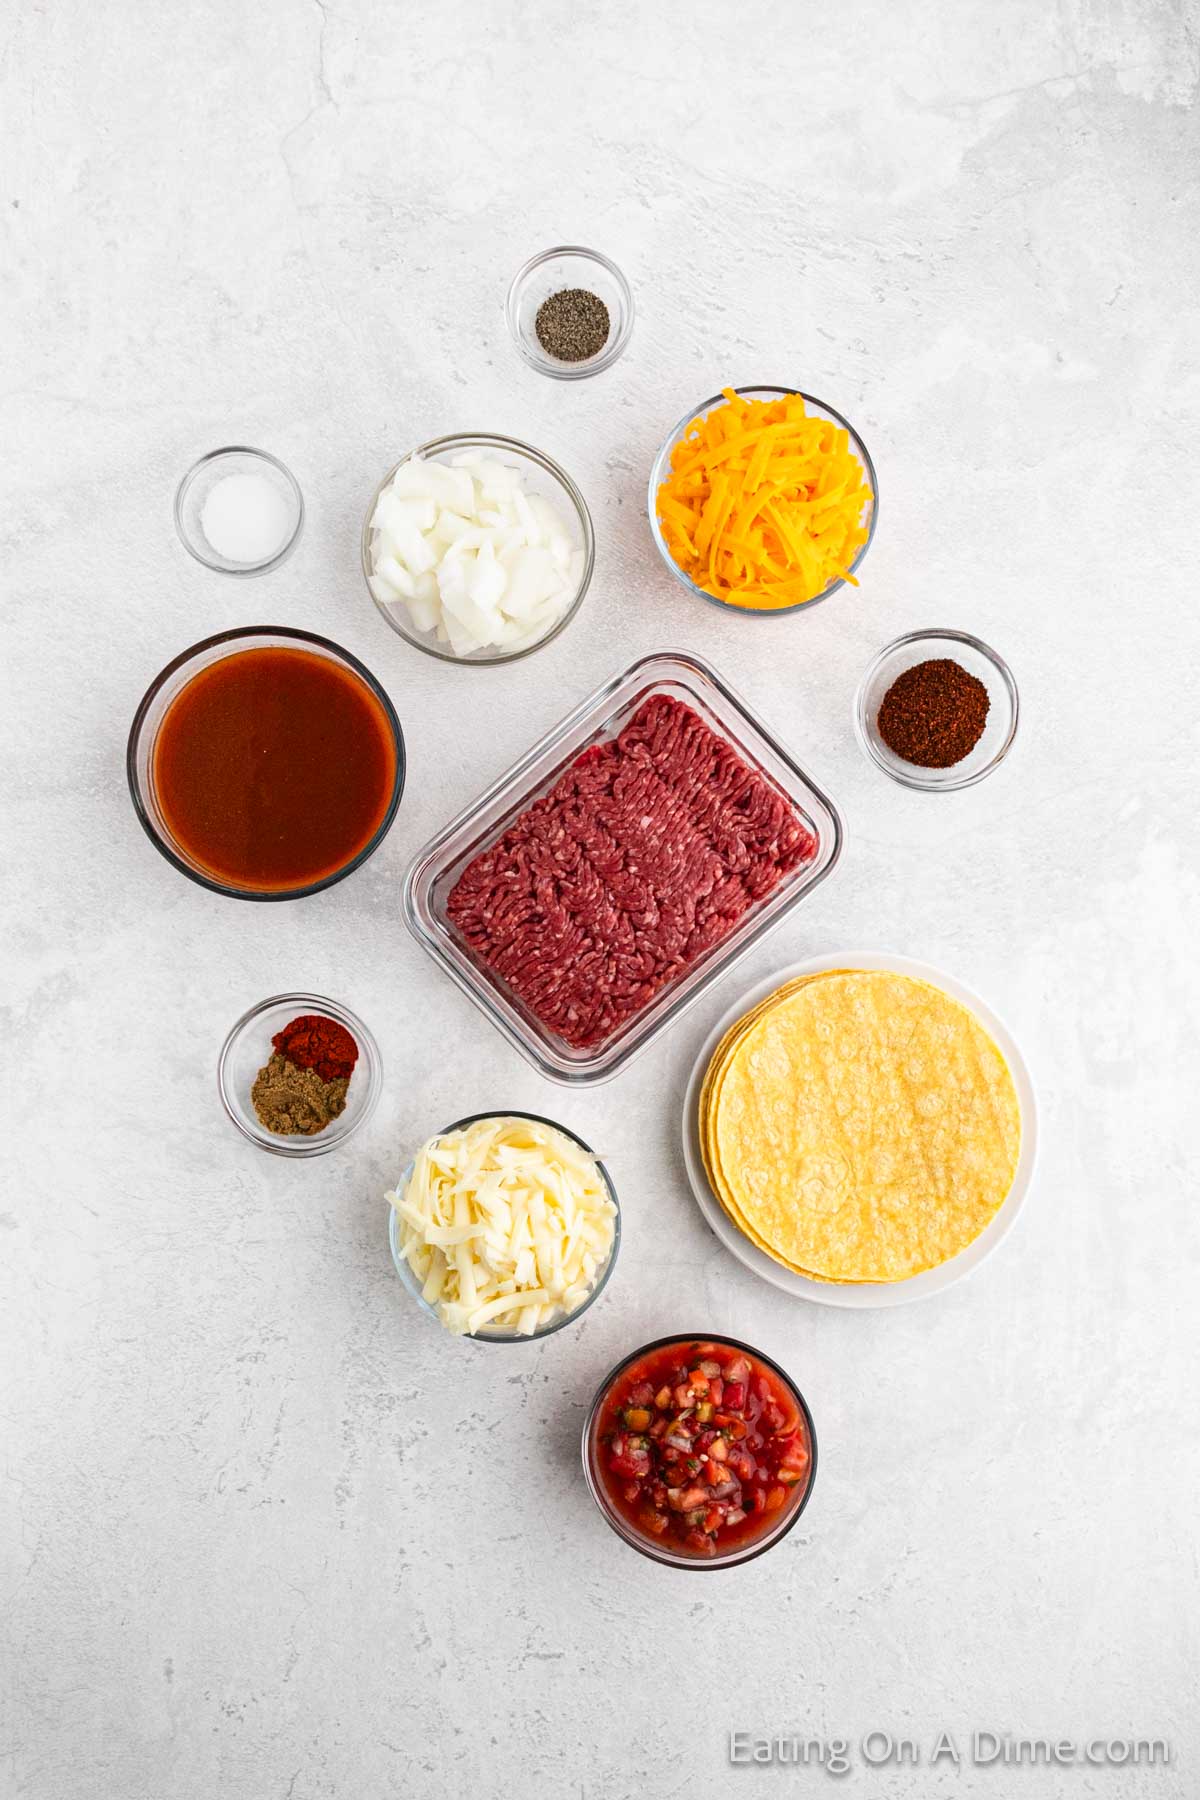 A flat lay photo of various ingredients on a light surface. Central is ground beef in a container, perfect for Easy Ground Beef Enchiladas. Surrounding are small bowls of diced onions, shredded cheddar, tortilla chips, salsa, shredded cheese, spices, and a cup of sauce. Text in the corner reads "Eating On A Dime.com".